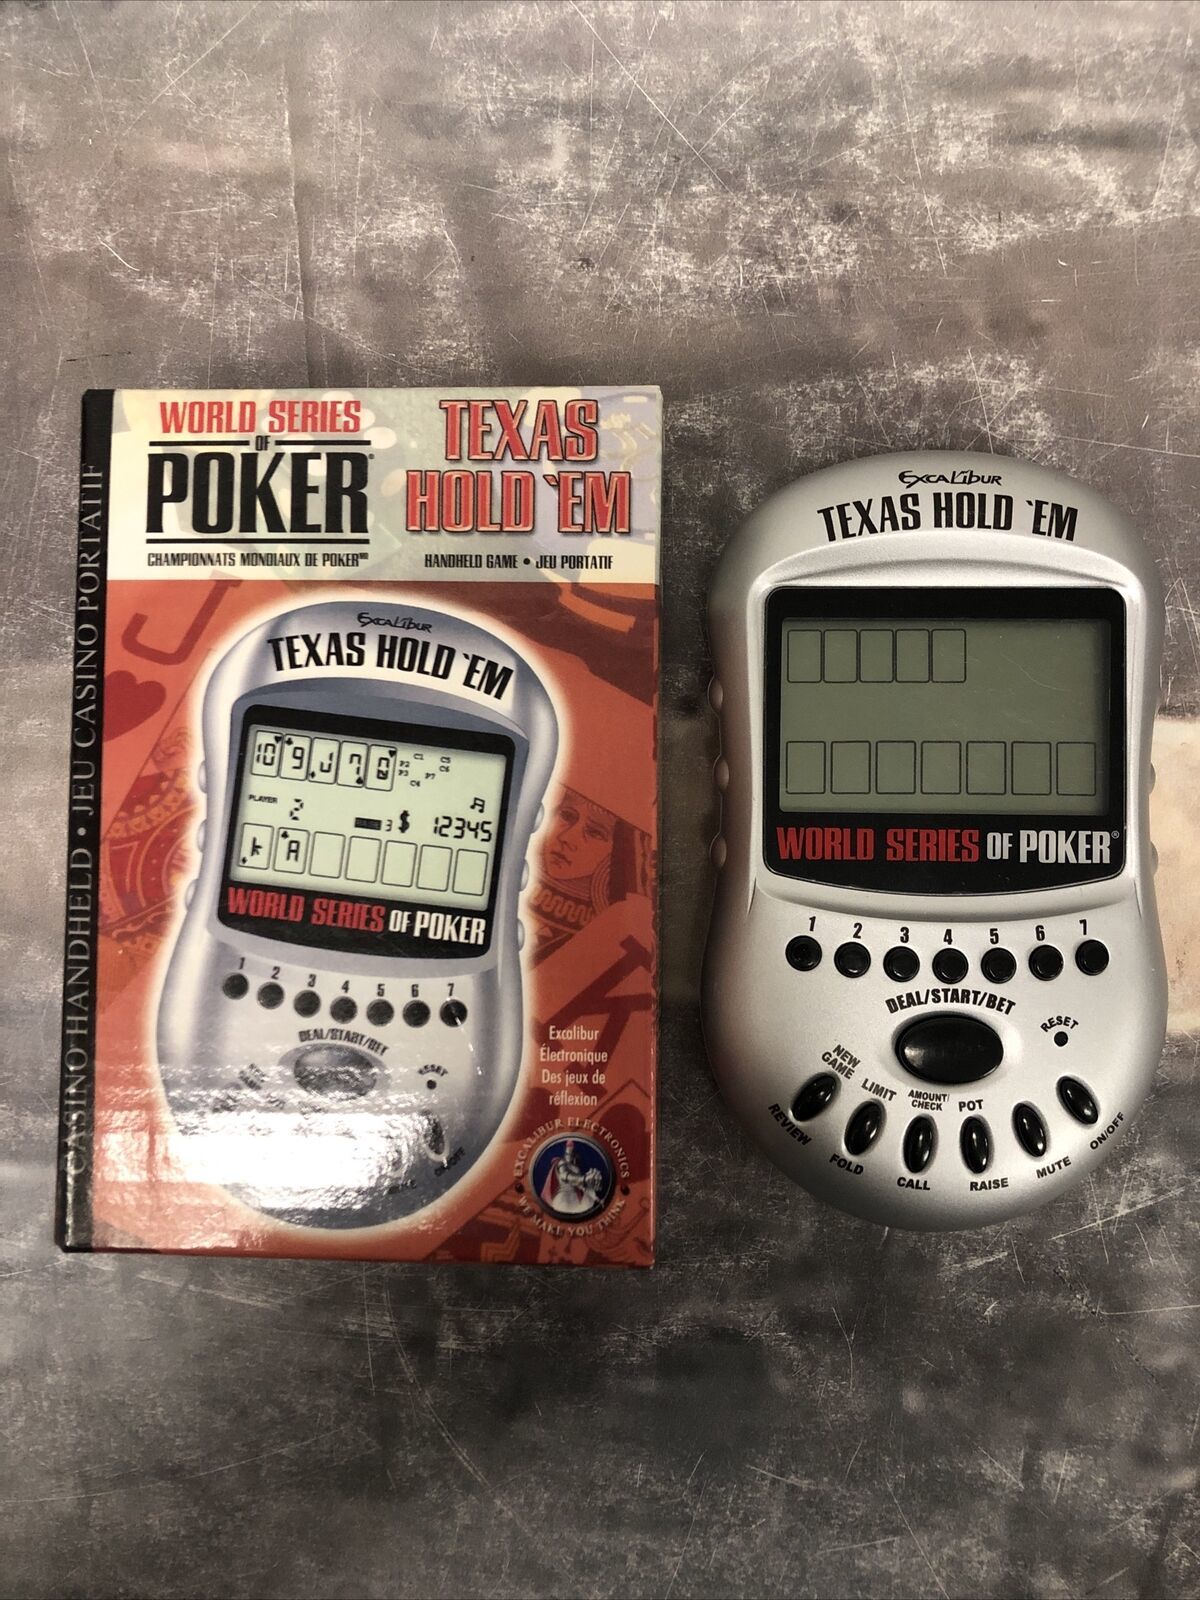 Texas Hold 'Em World Series of Poker Handheld Excalibur Electronic Card Game - $6.92